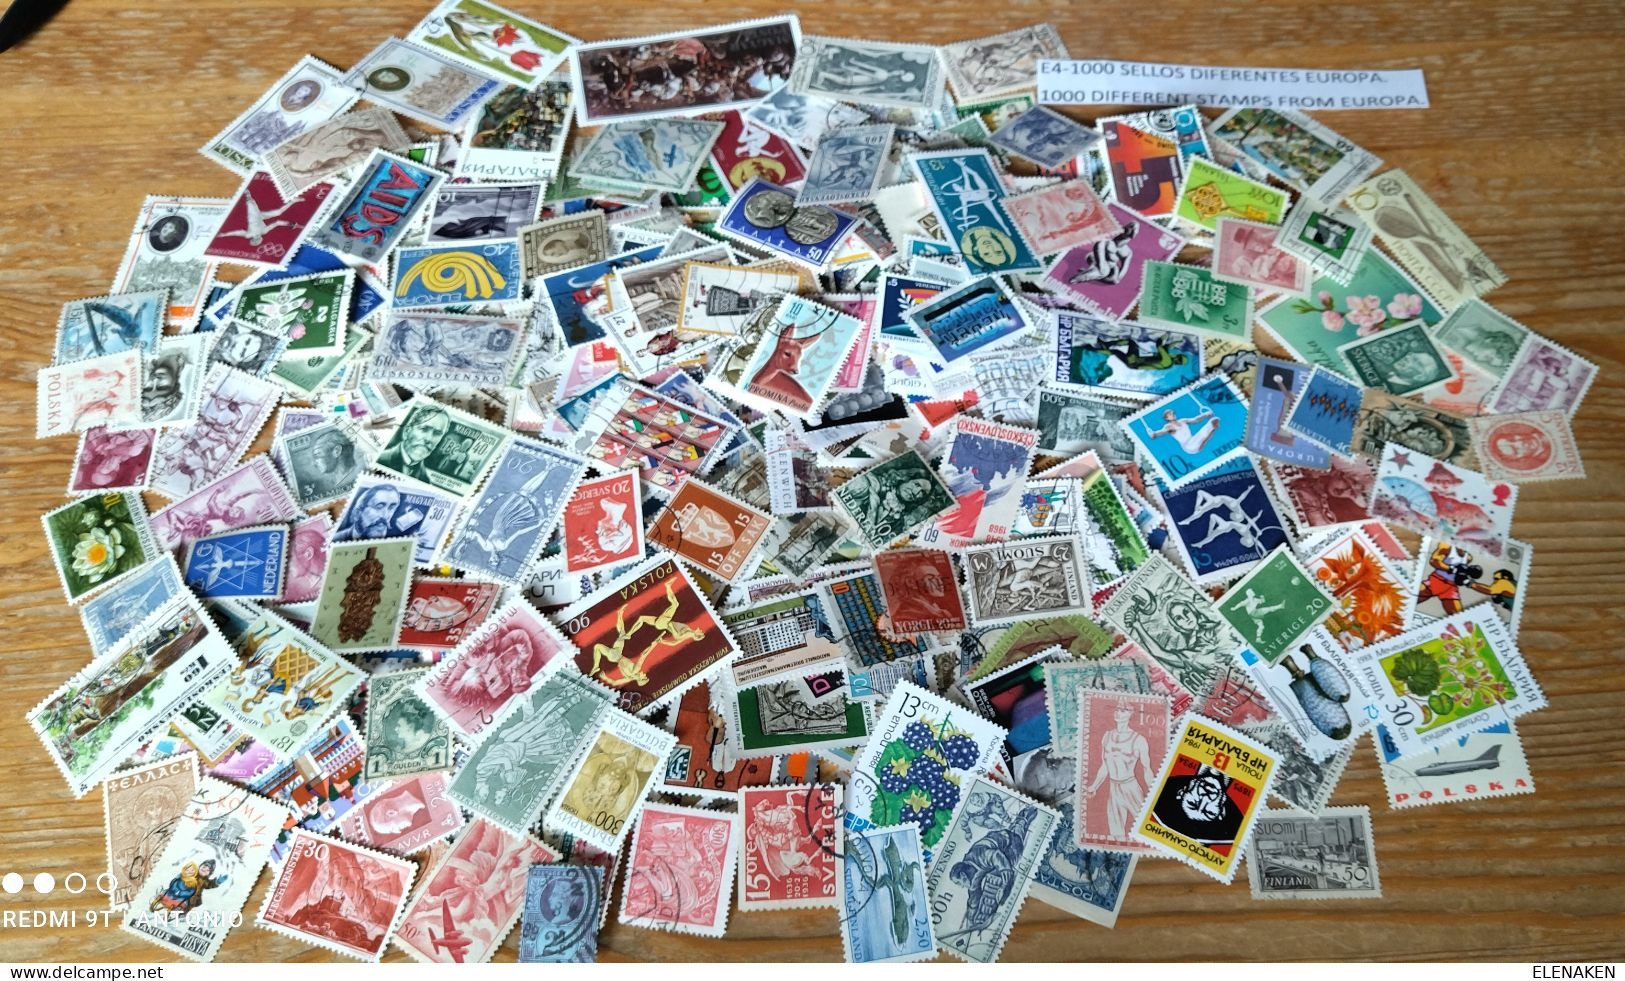 E4-1000 SELLOS DIFERENTES PAÍSES DE EUROPA  1000 STAMPS DIFFERENT COUNTRIES OF EUROPE - Lots & Kiloware (mixtures) - Min. 1000 Stamps